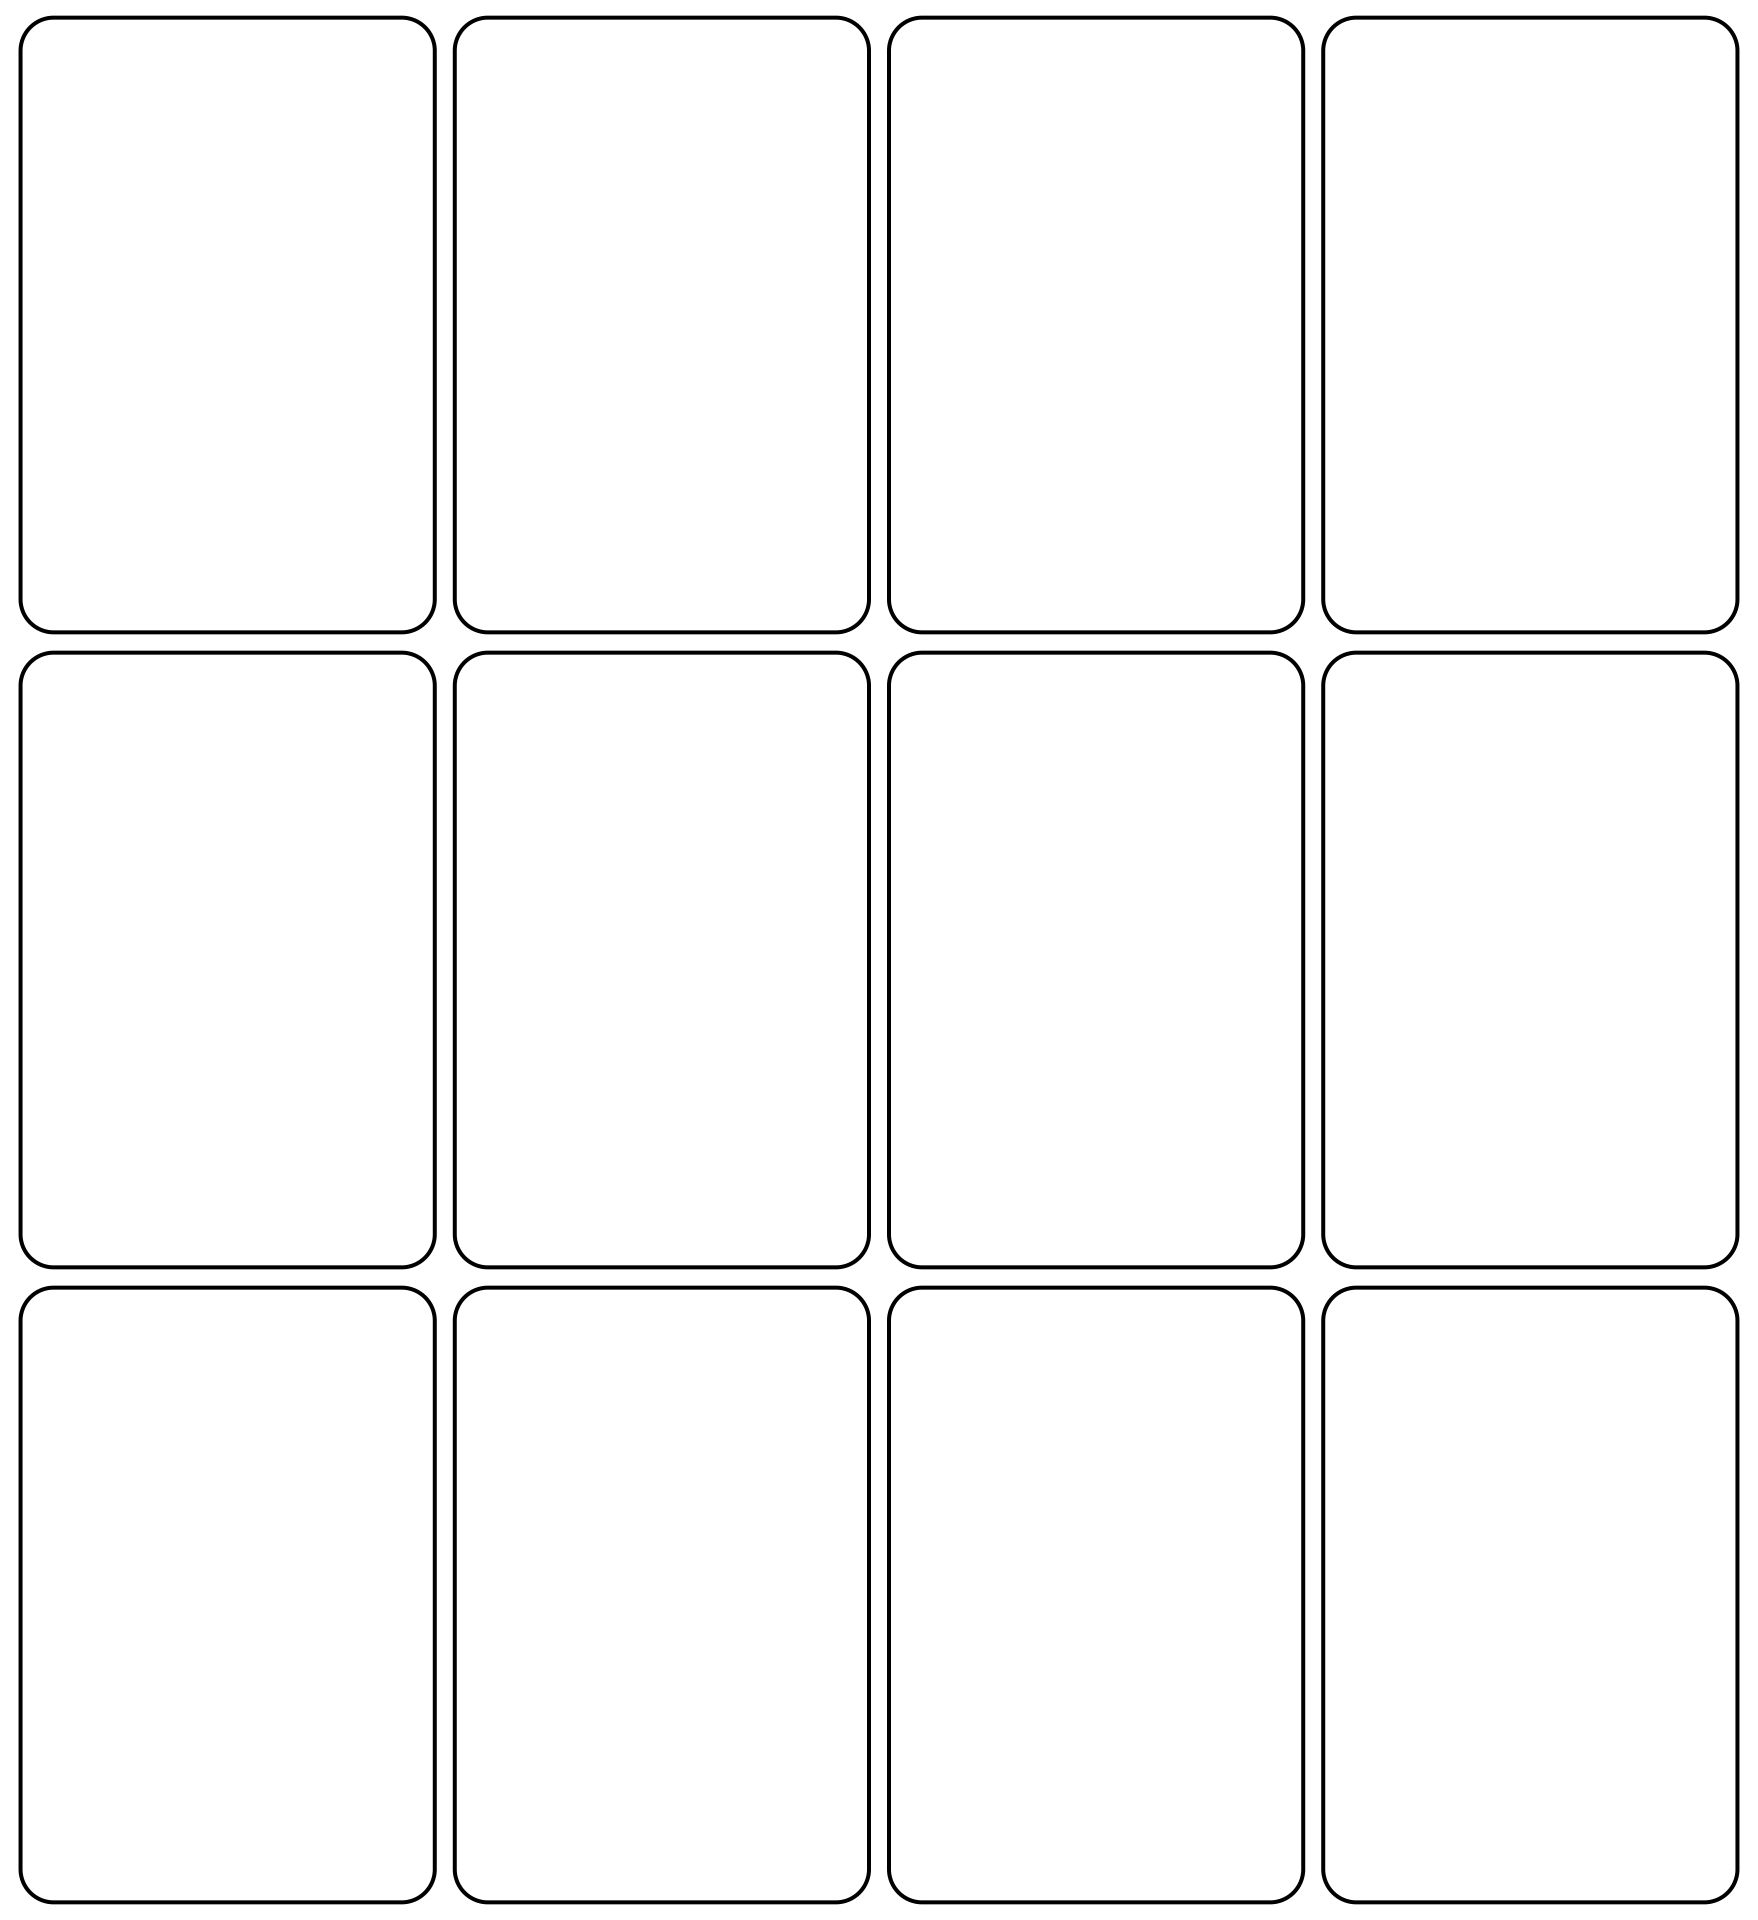 4-best-images-of-deck-of-playing-cards-printable-printable-blank